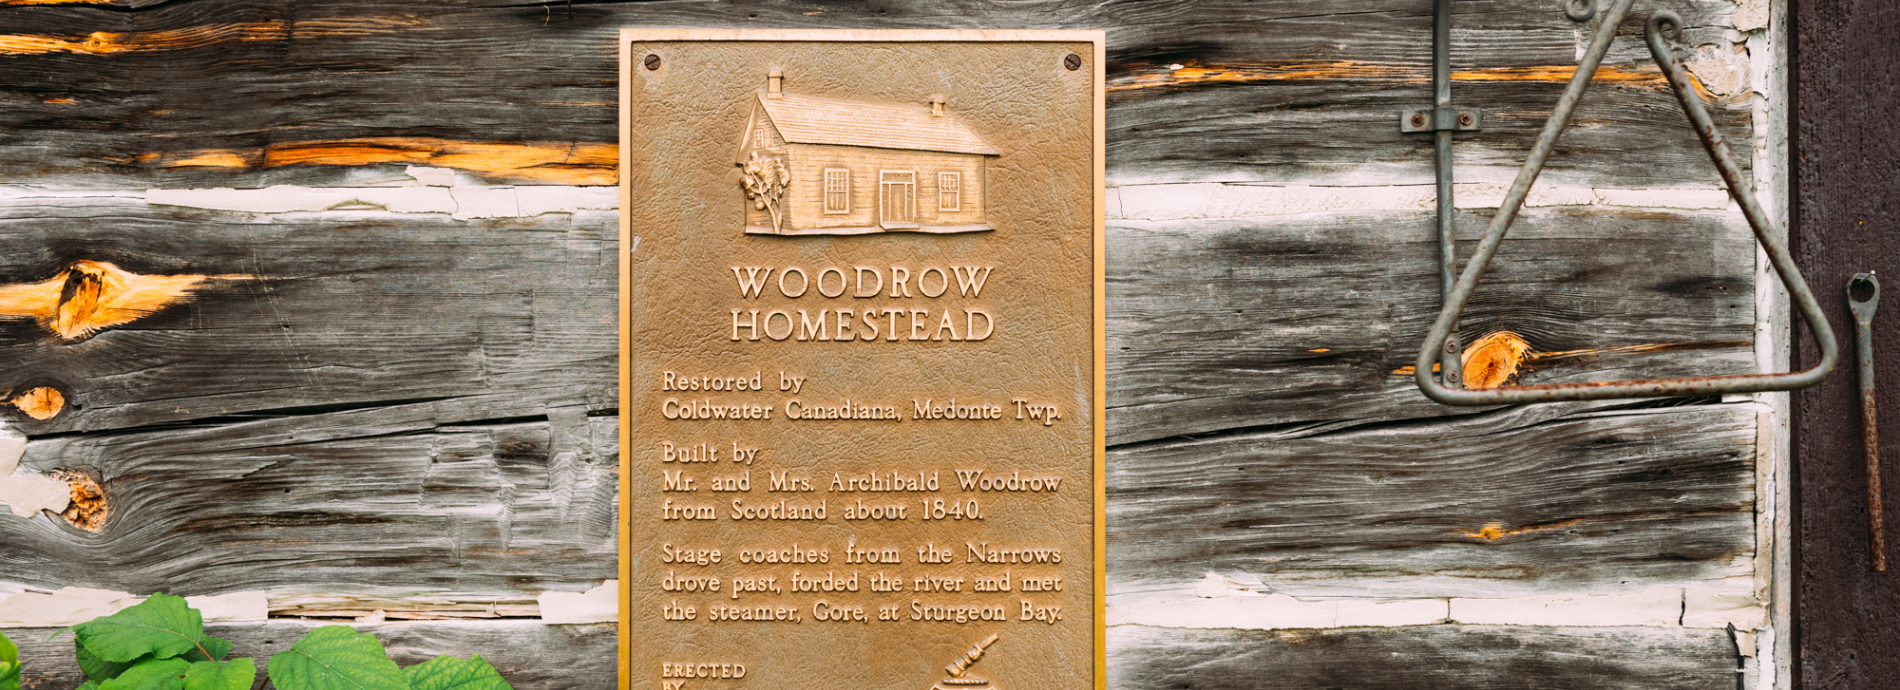 Woodrow plaque at Coldwater Canadiana Museum